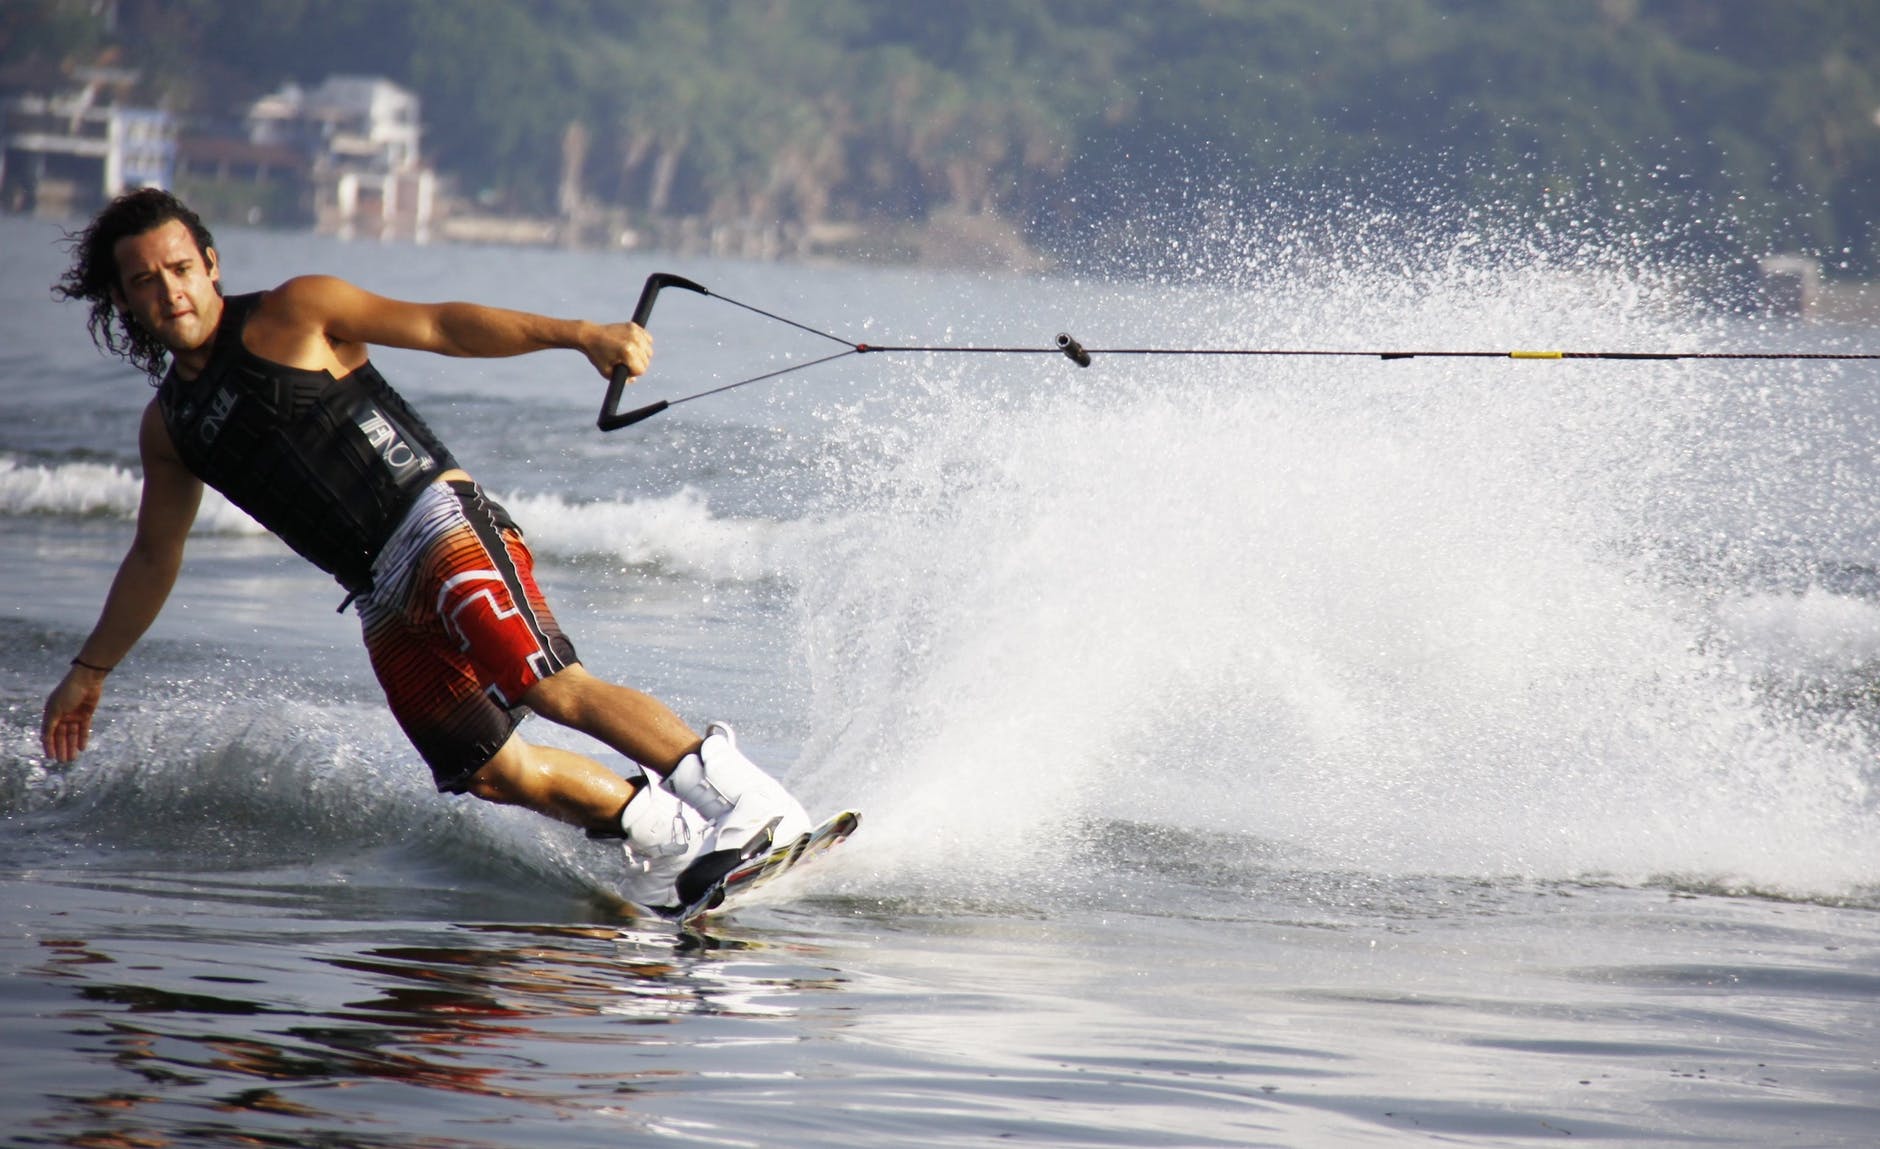 Things You Need to Know Before Buying Your First Wakeboard